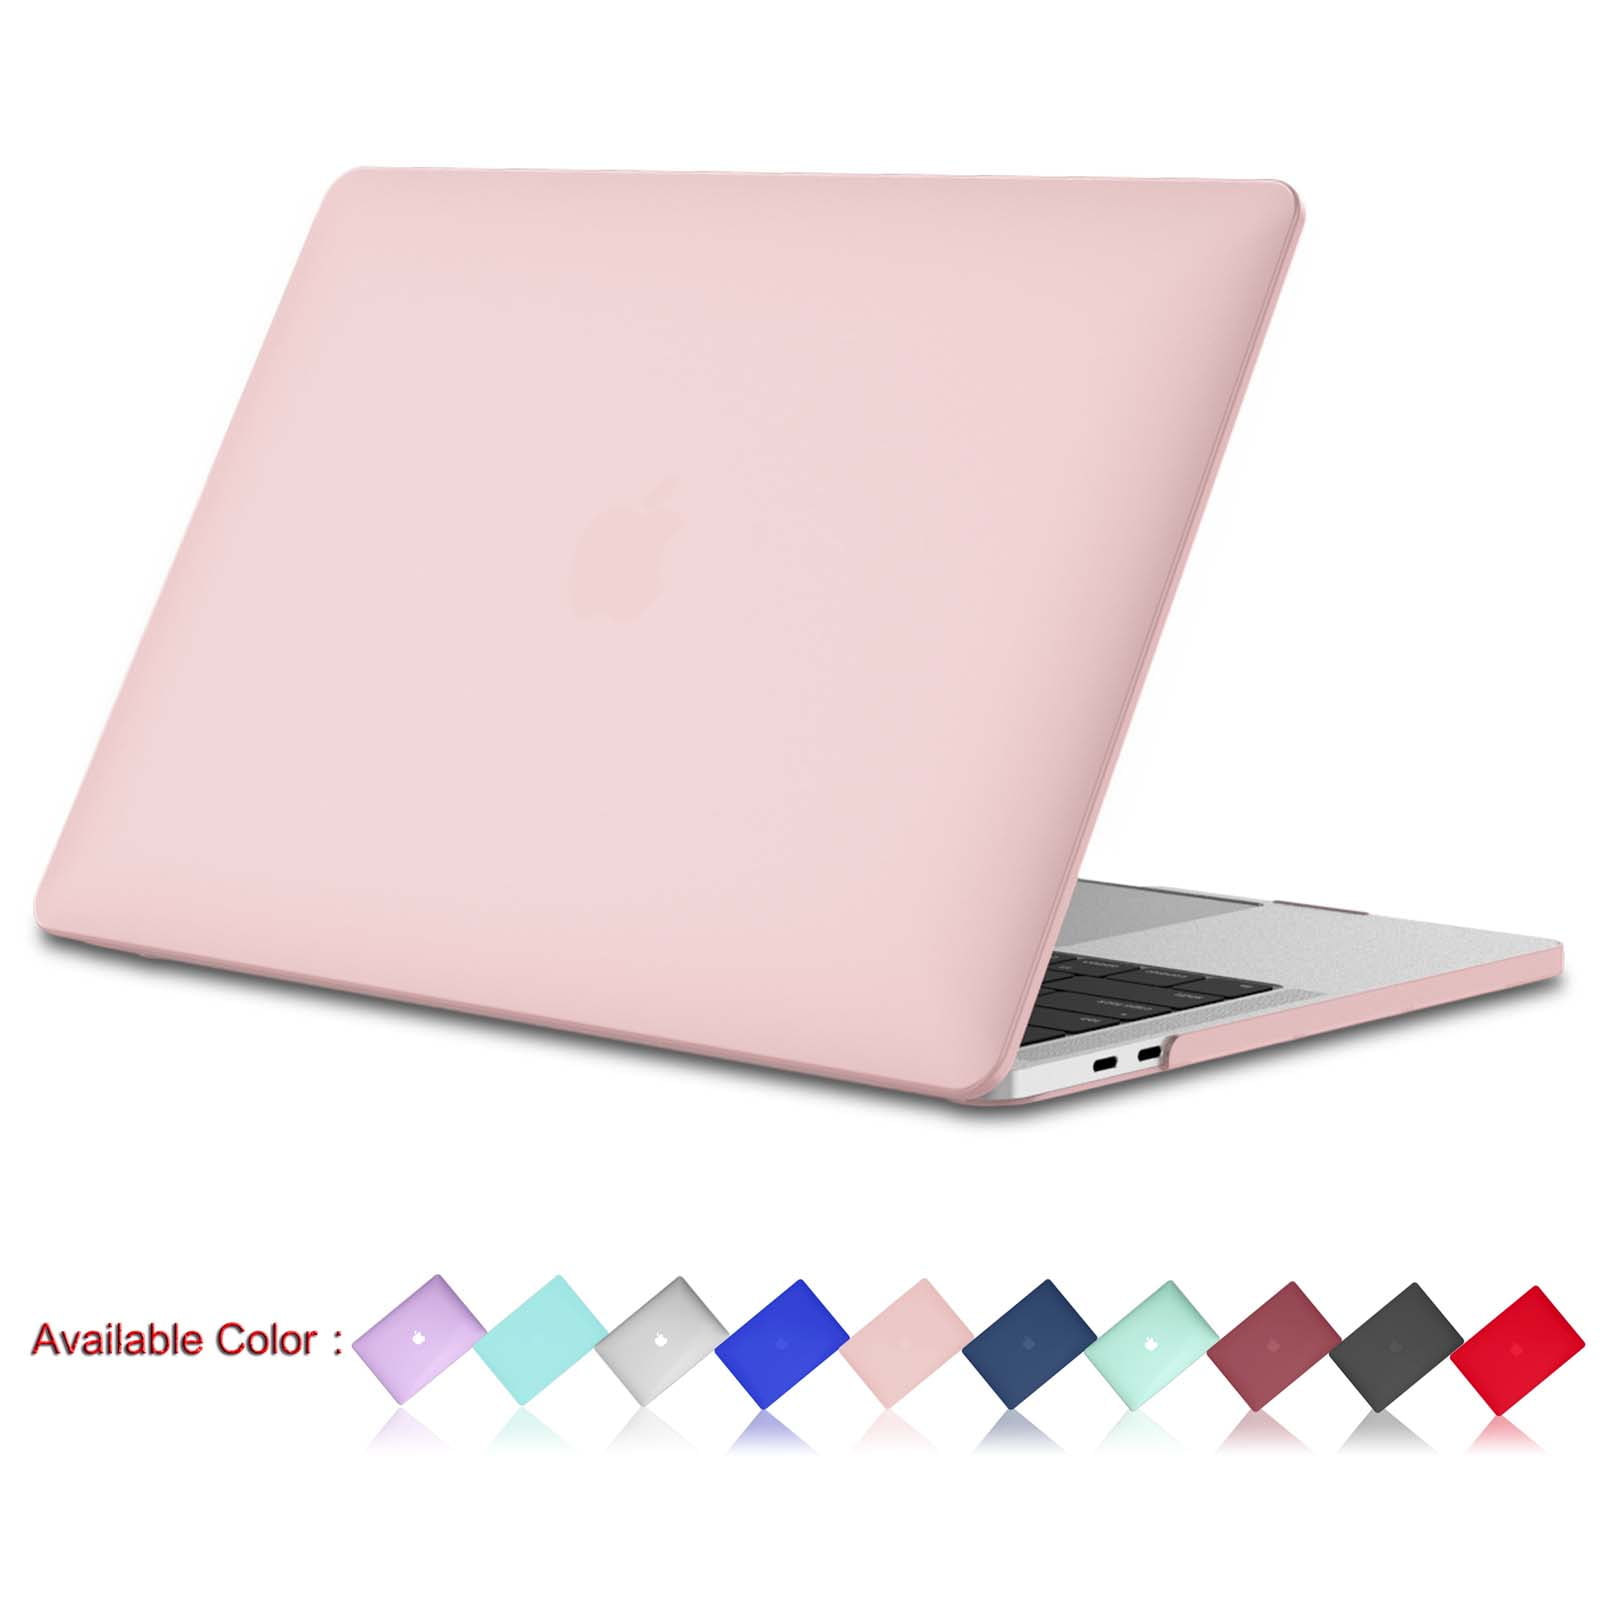 Key 2in1 CLEAR Rubberized Case for NEW Macbook Pro 15" A1398 Retina display 